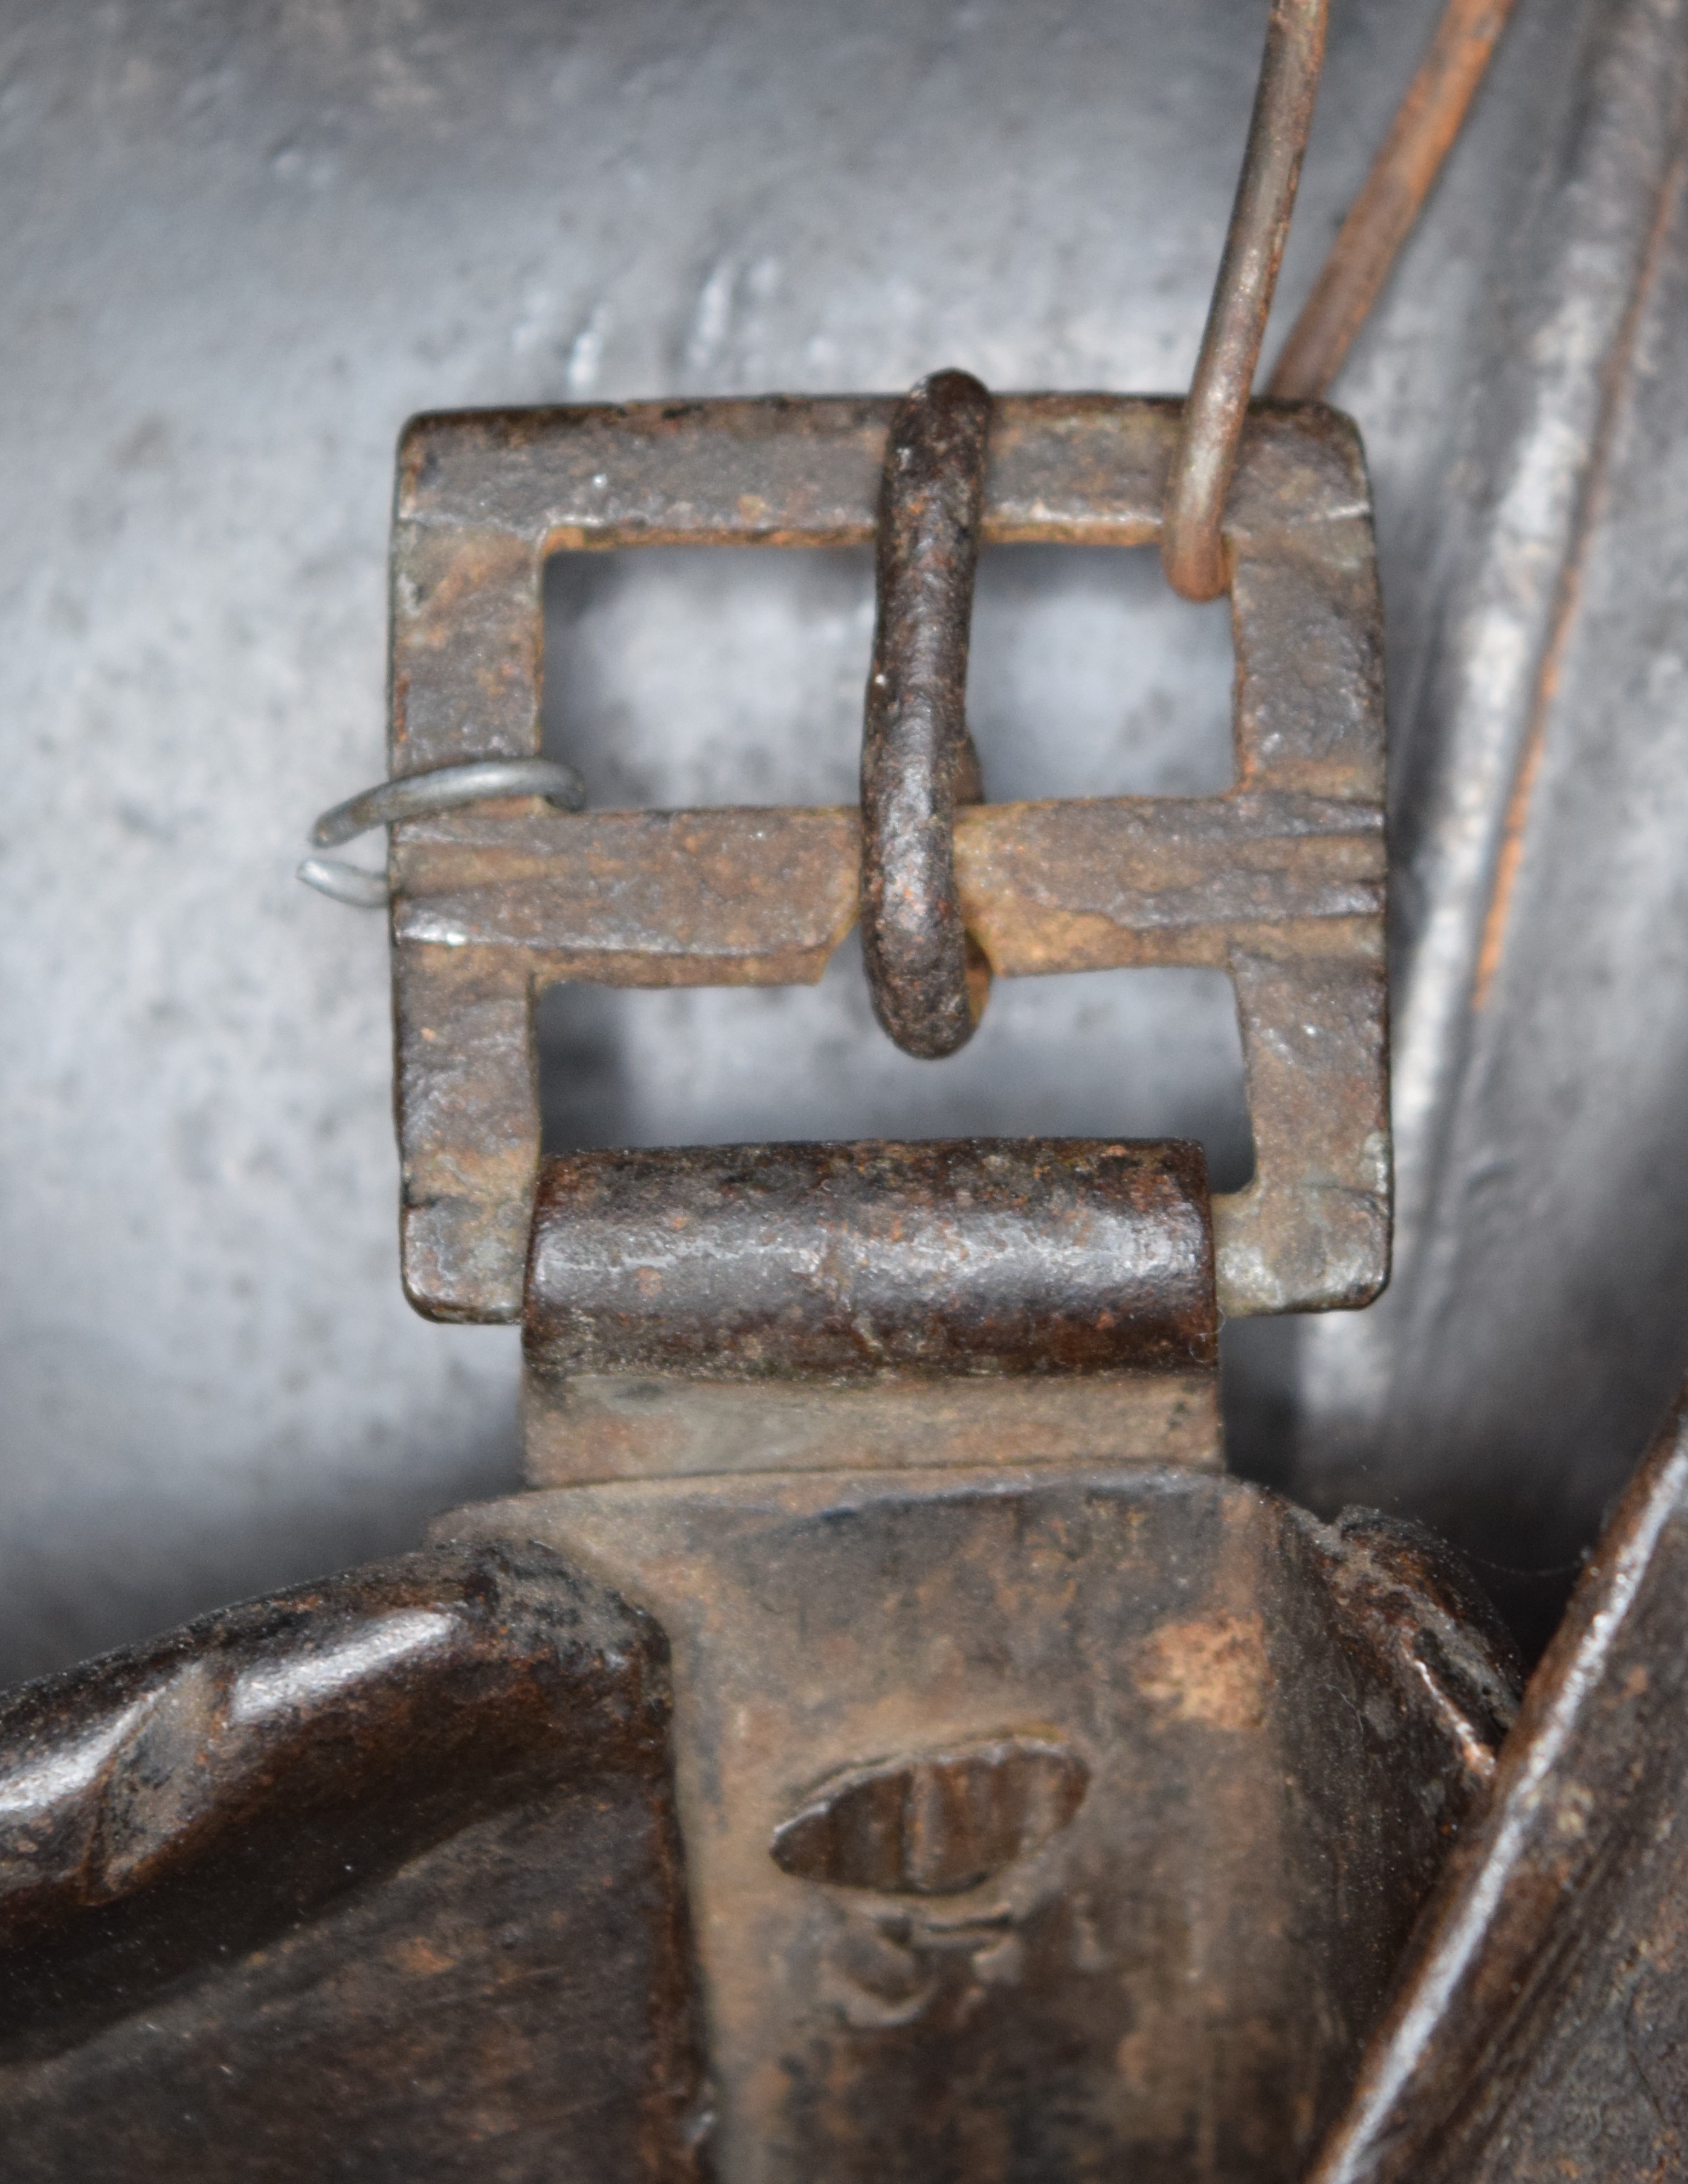 Buckle at the shoulder on a simple c. 1600 munition breastplate